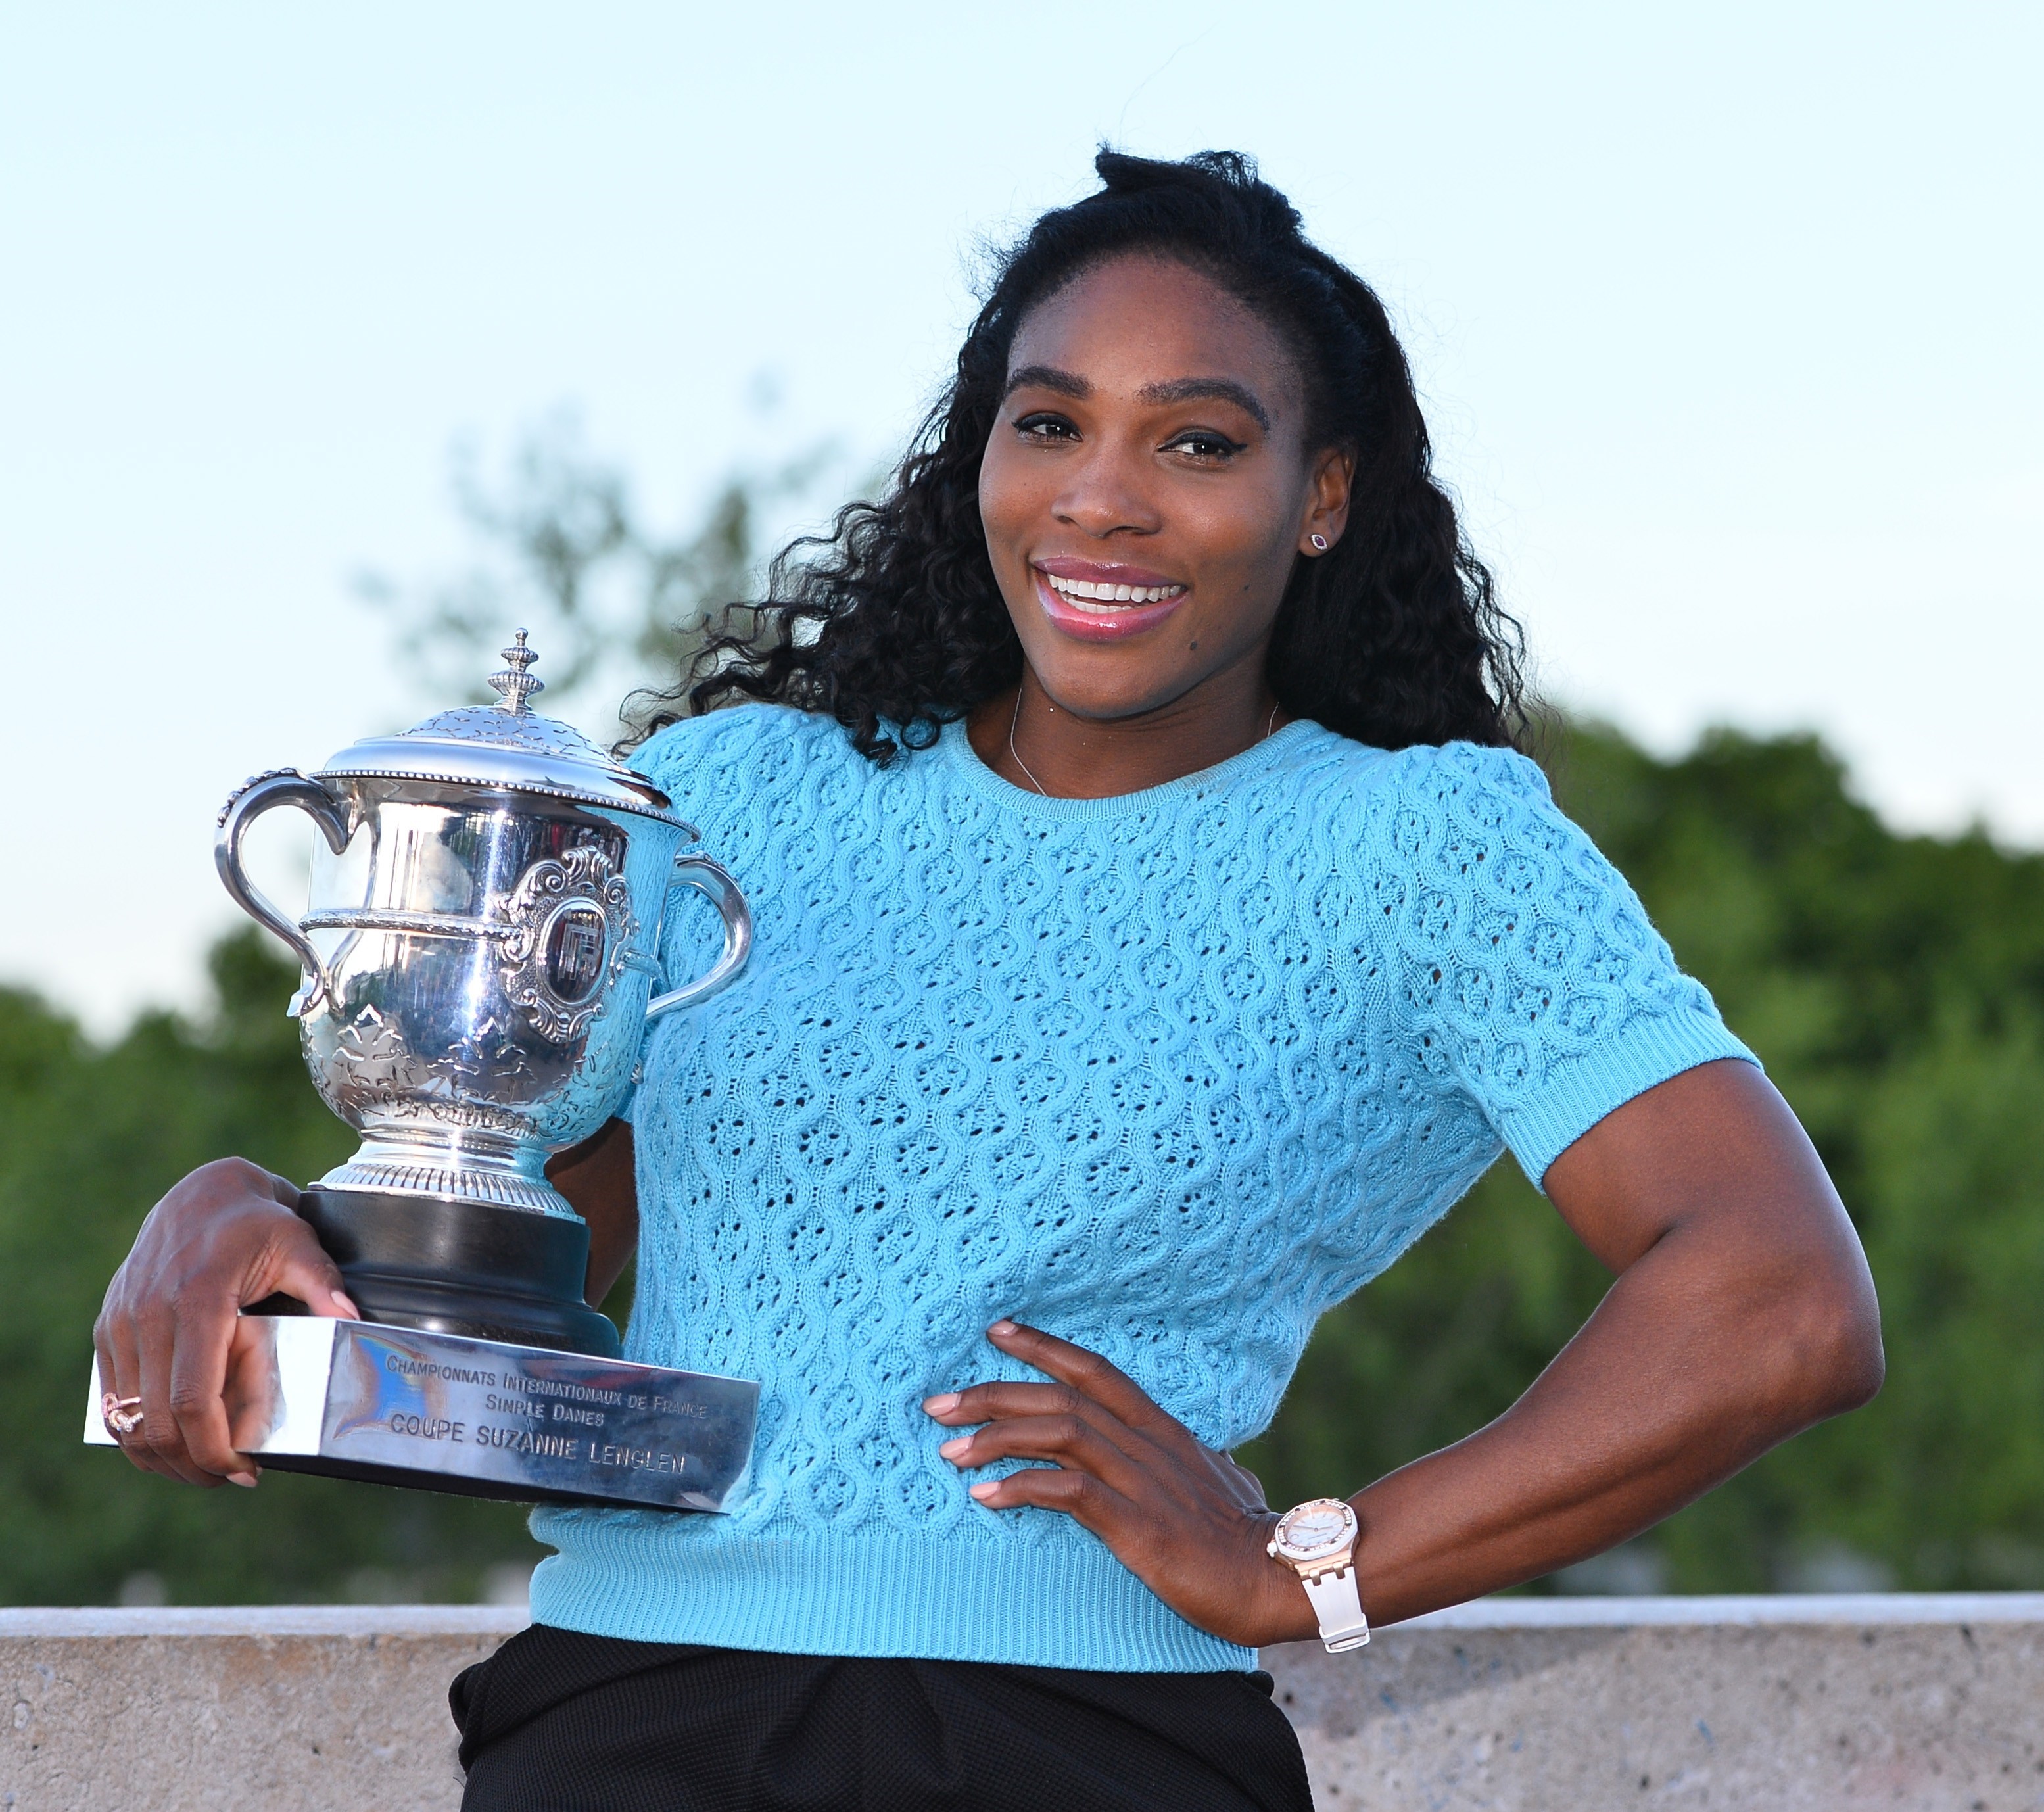 Serena Williams poses with the winner's trophy at the Bir-Hakeim bridge after winning the women's final of the French Open tennis championships at Roland Garros in Paris, France on June 6, 2015. (Anadolu Agency&mdash;Getty Images)